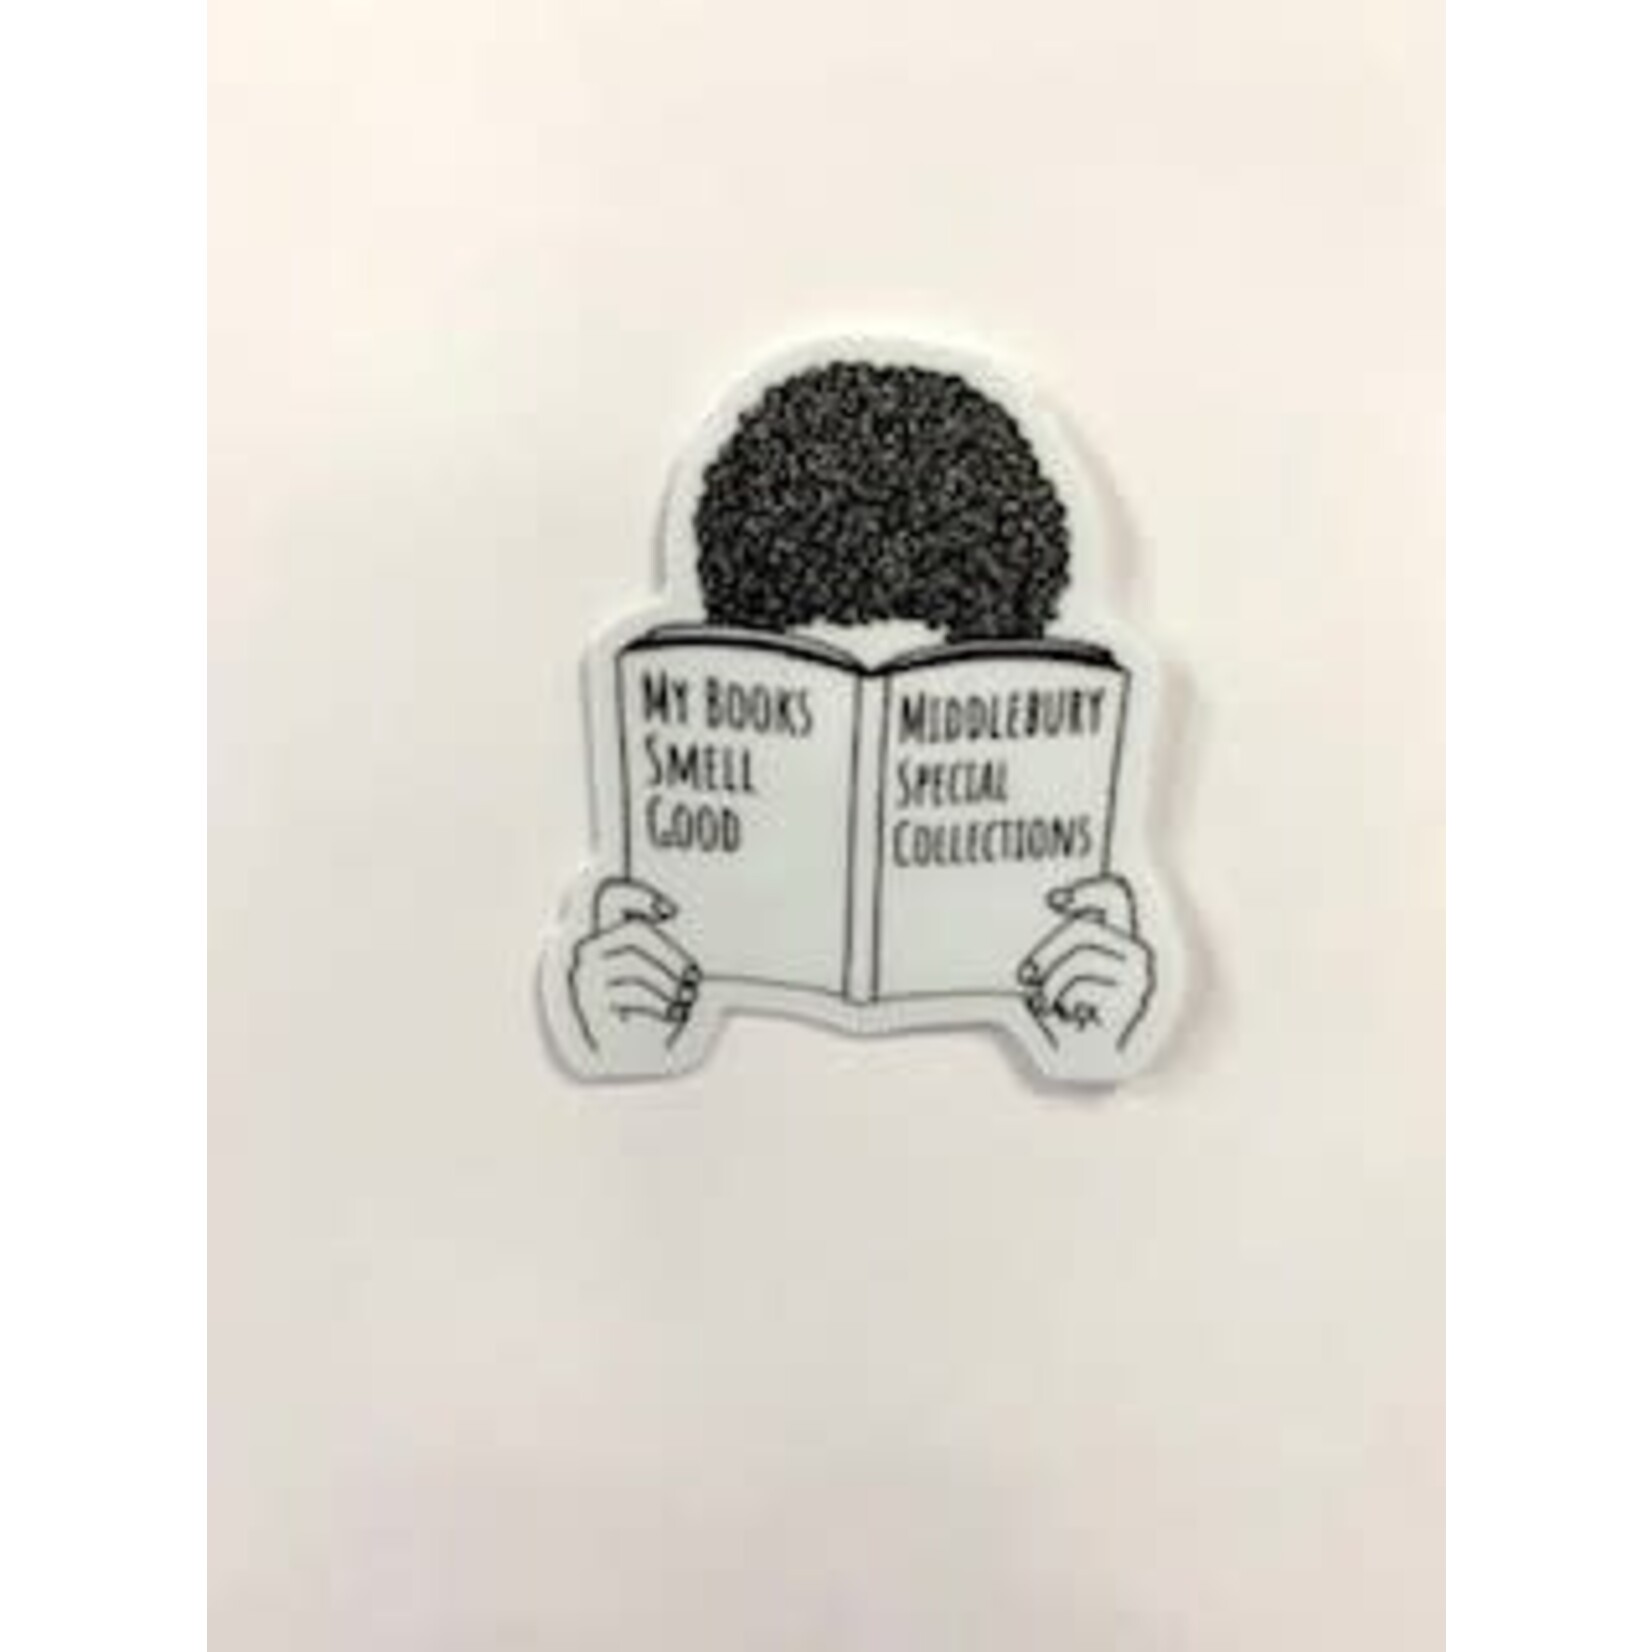 SPECIAL COLLECTIONS STICKER